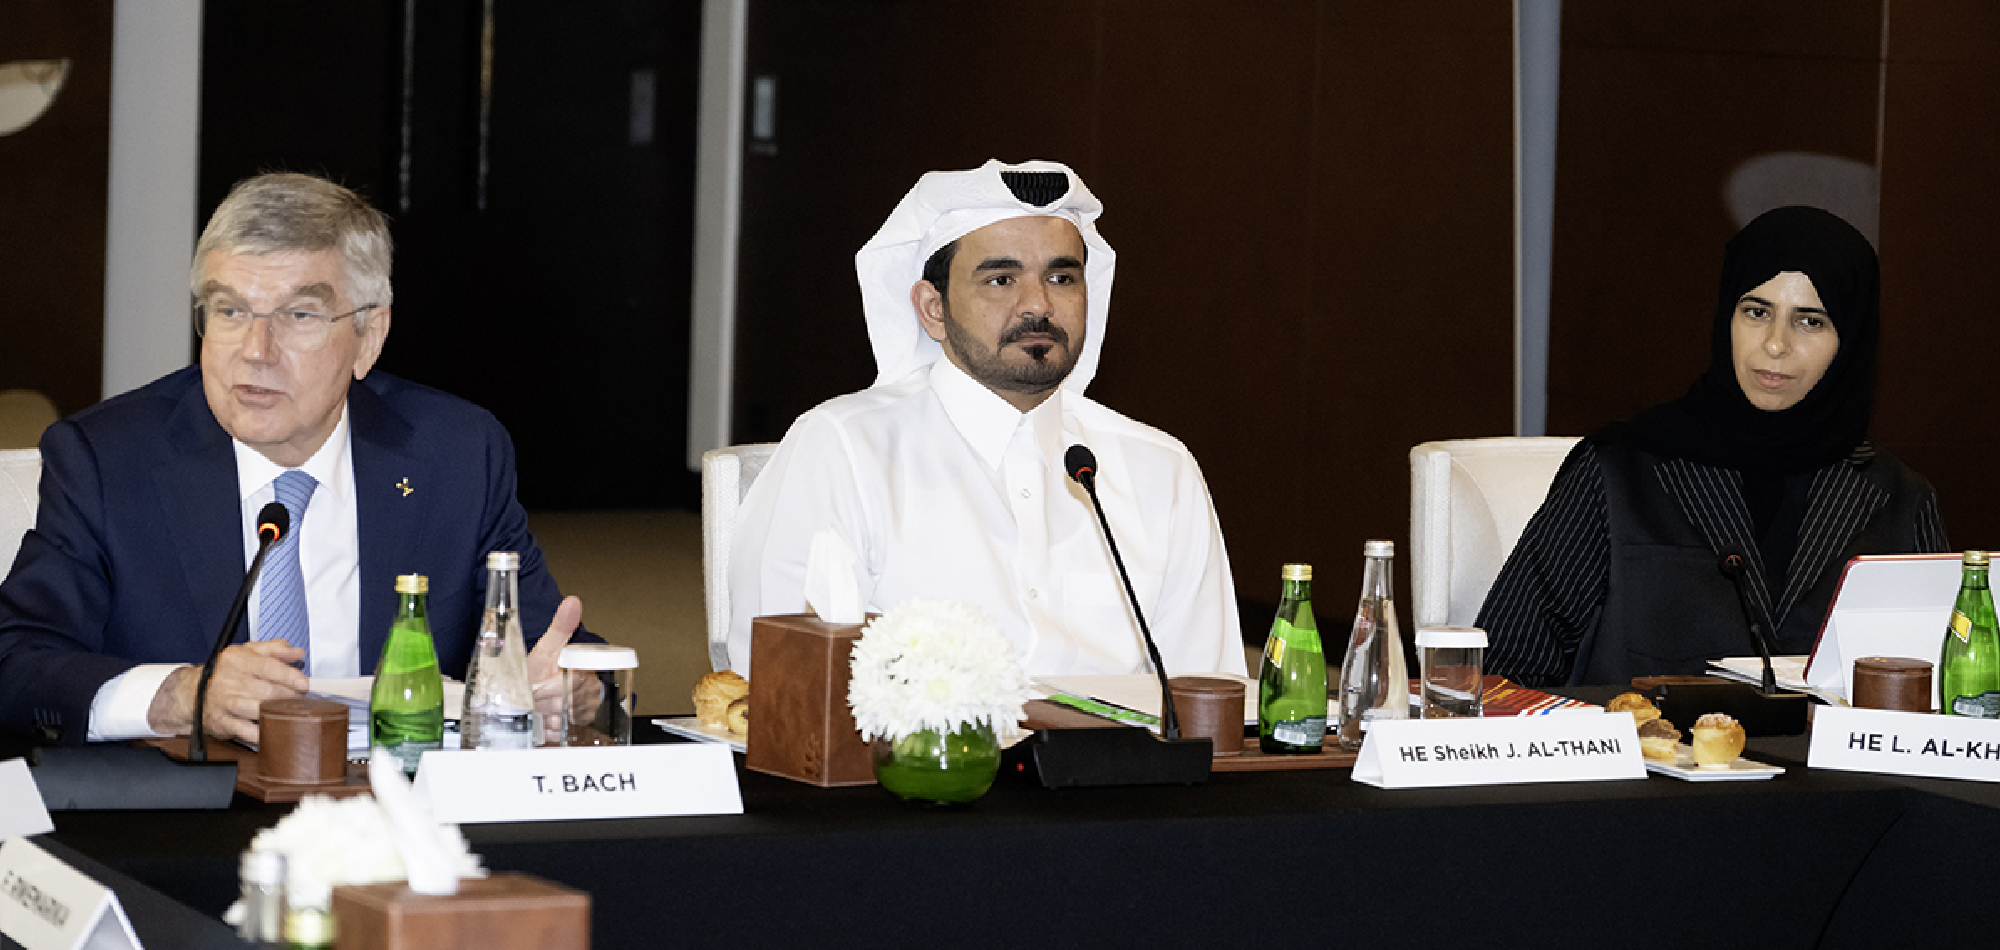 Sheikh Joaan hosts Olympic Refuge Foundation for Annual Board meeting in Doha